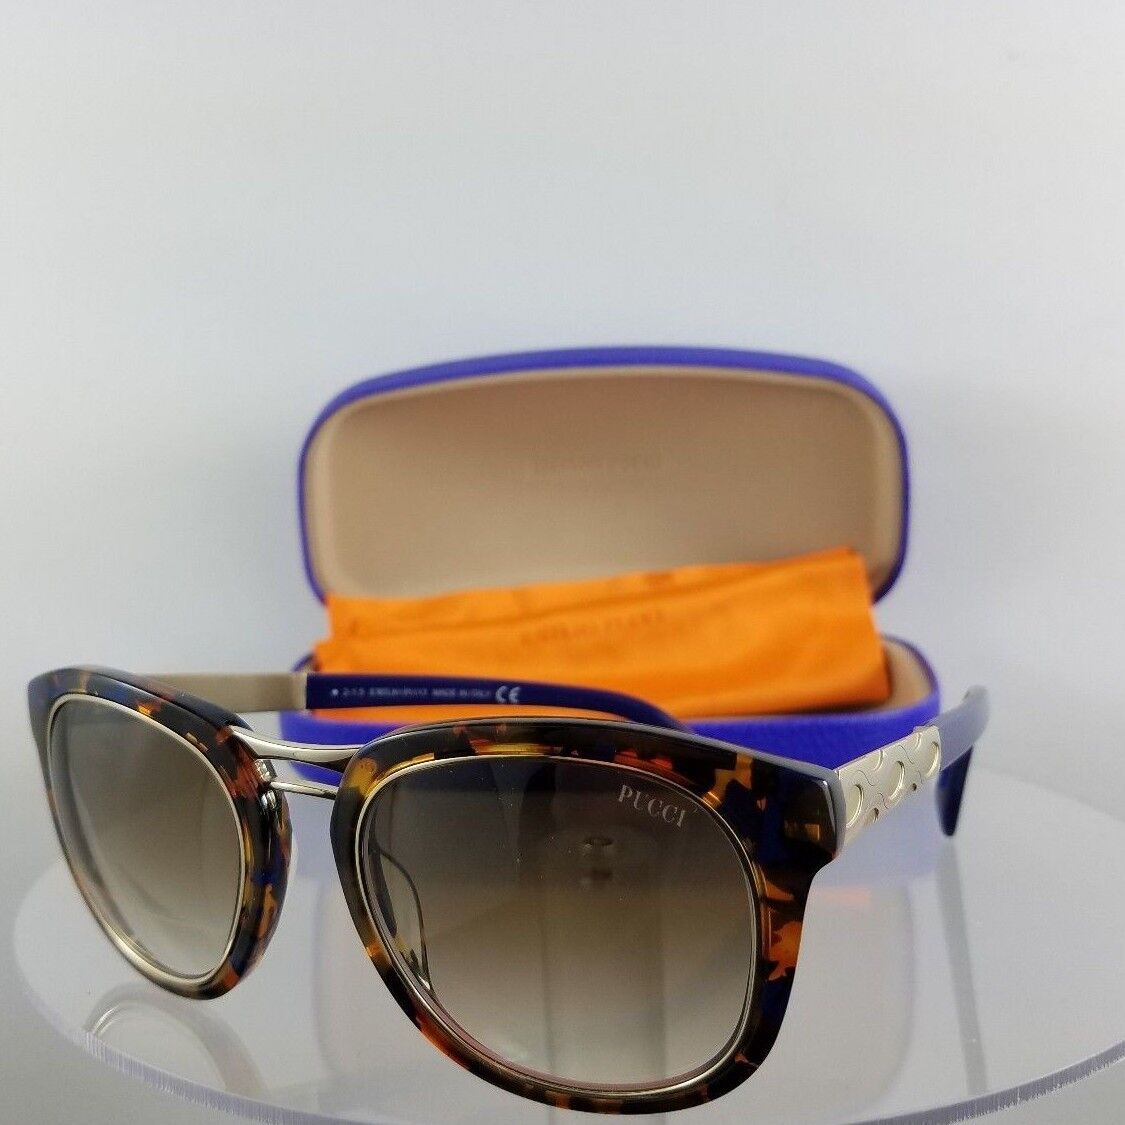 4Brand New Authentic Emilio Pucci Sunglasses EP 20 55F Navy Tortoise Gold EP20